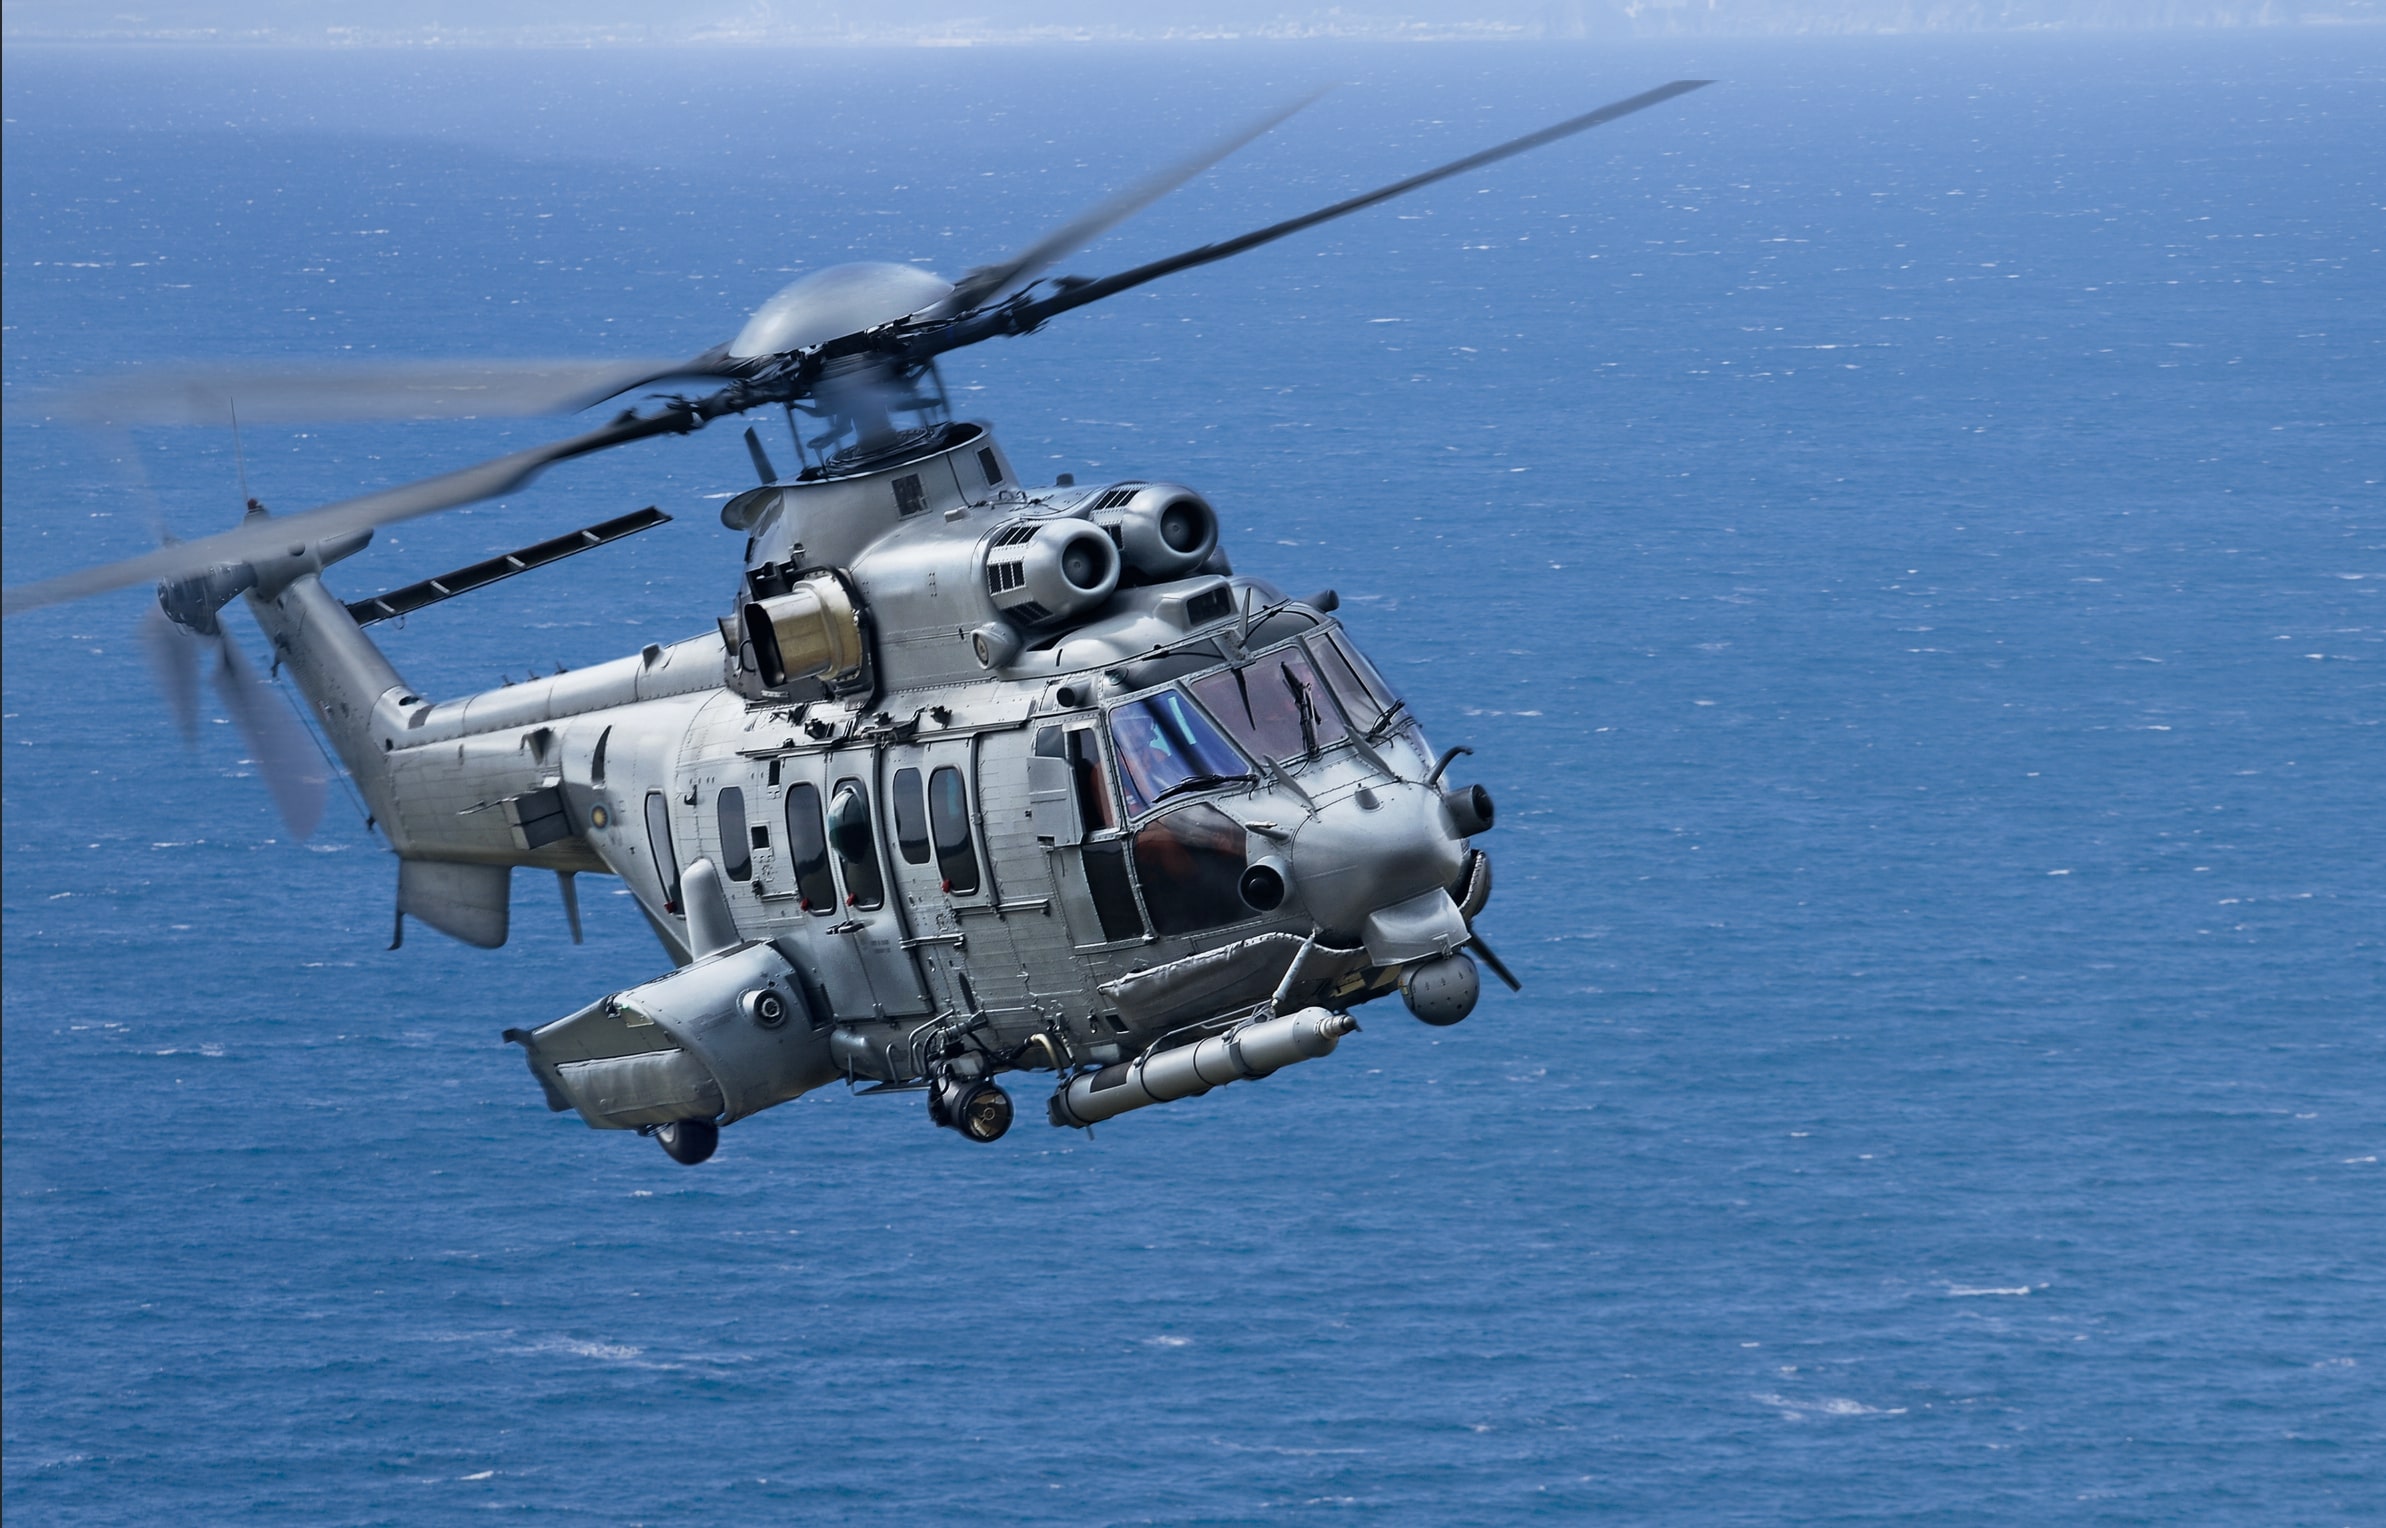 H225M Caracal helicopter.